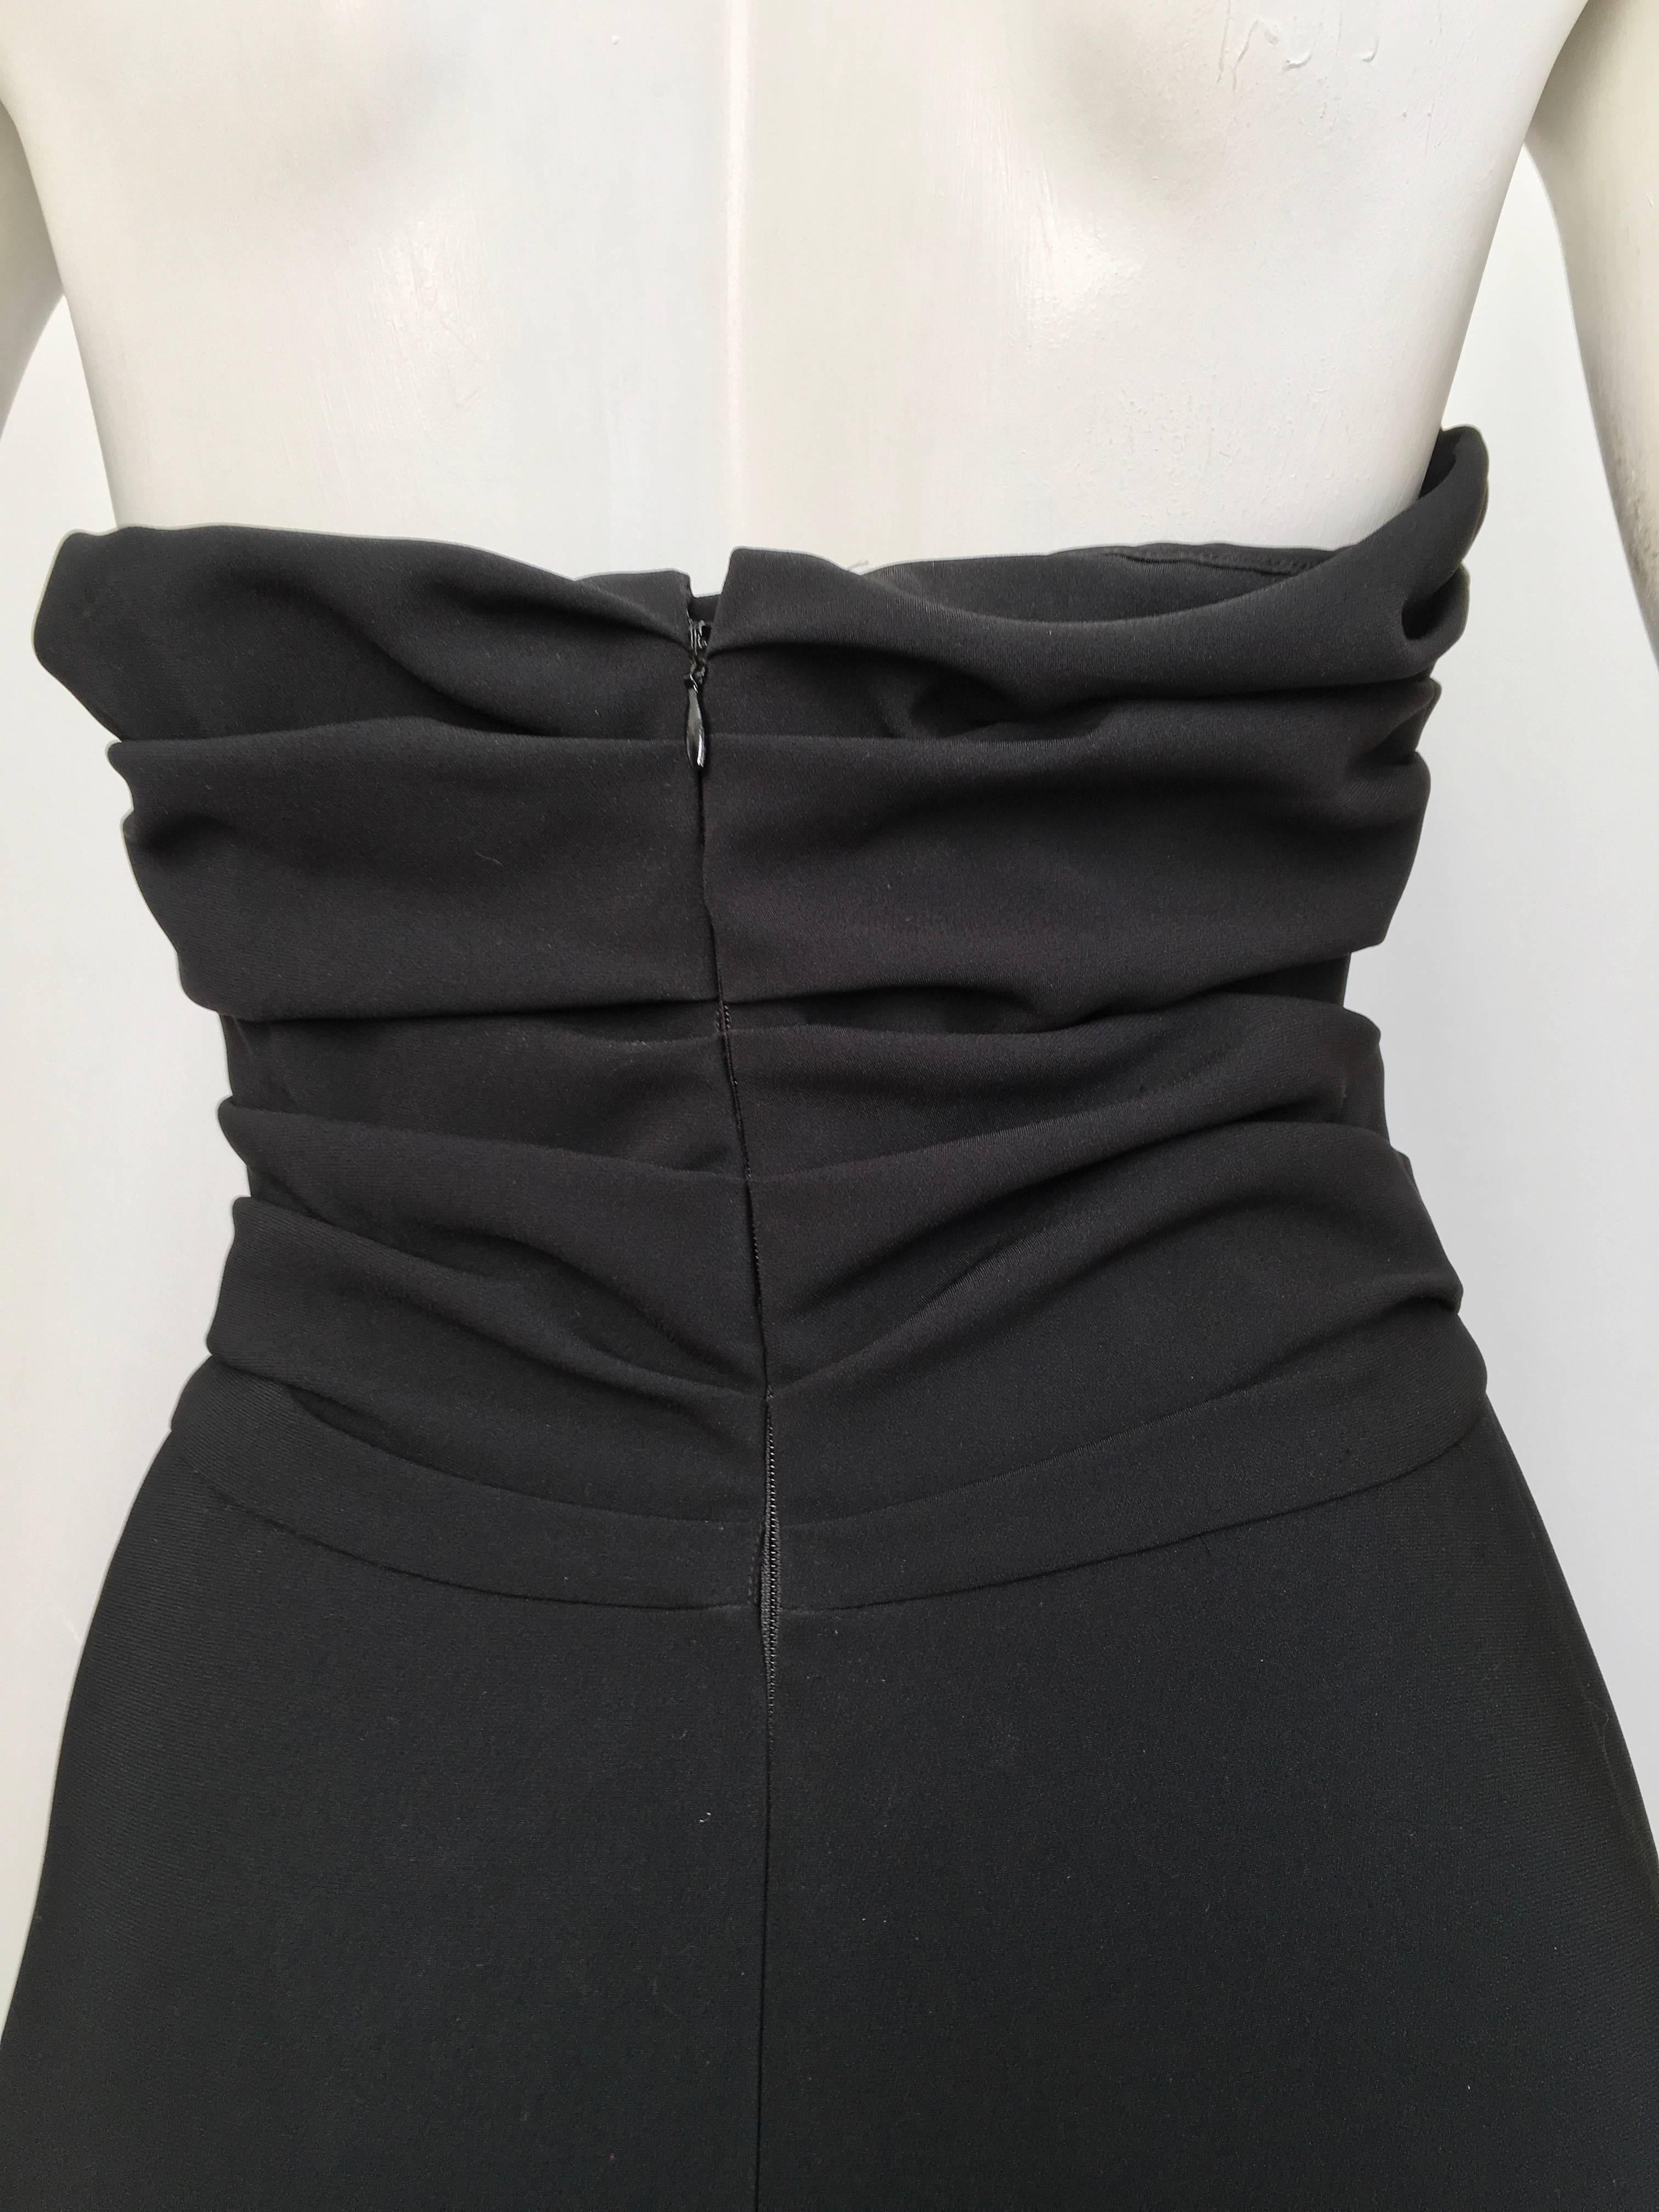 Moschino Black Strapless Gown Size 6. For Sale 4